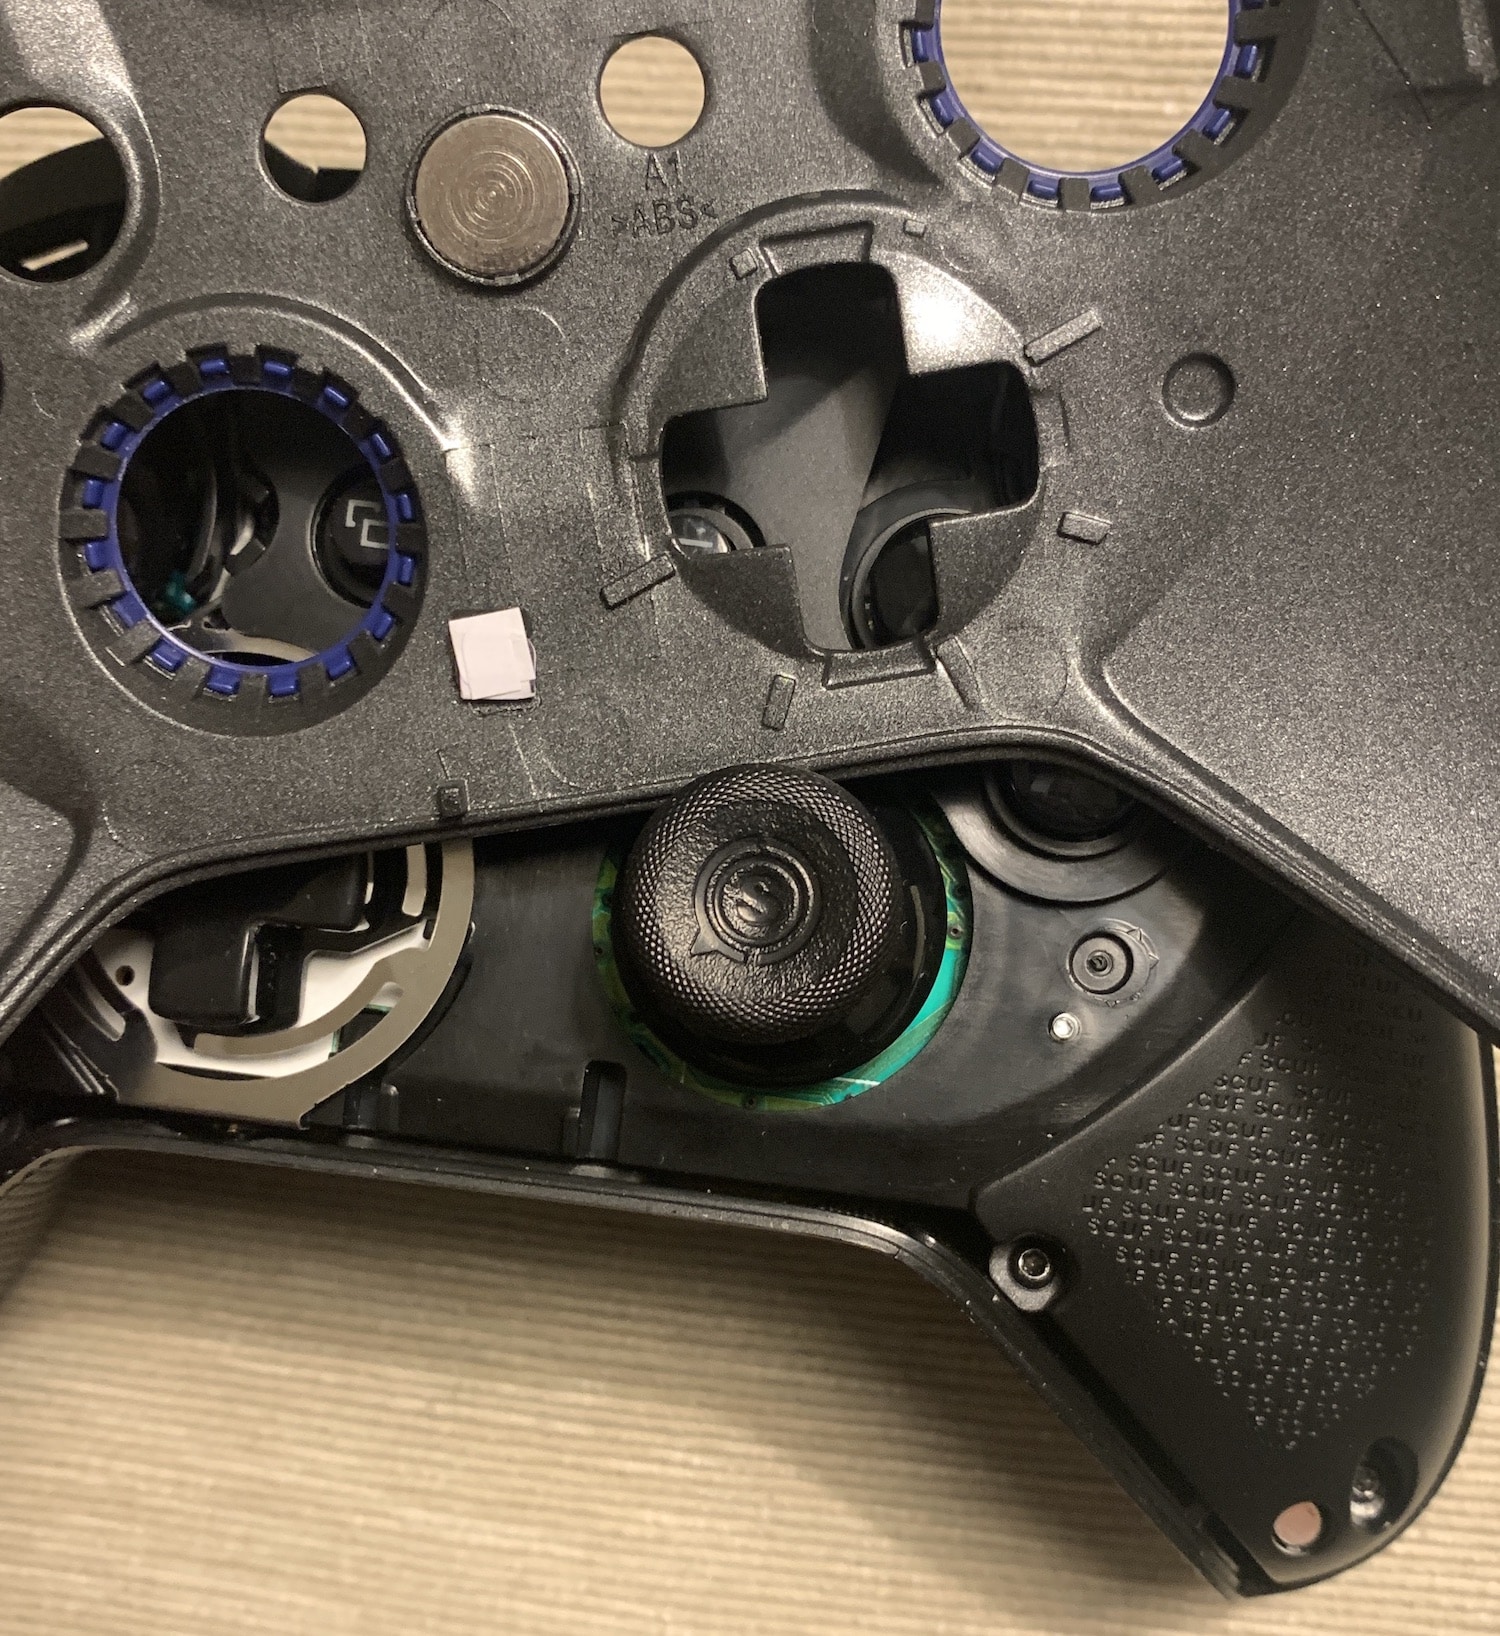 How To Fix Ps4 Controller Analog Stick Stuck